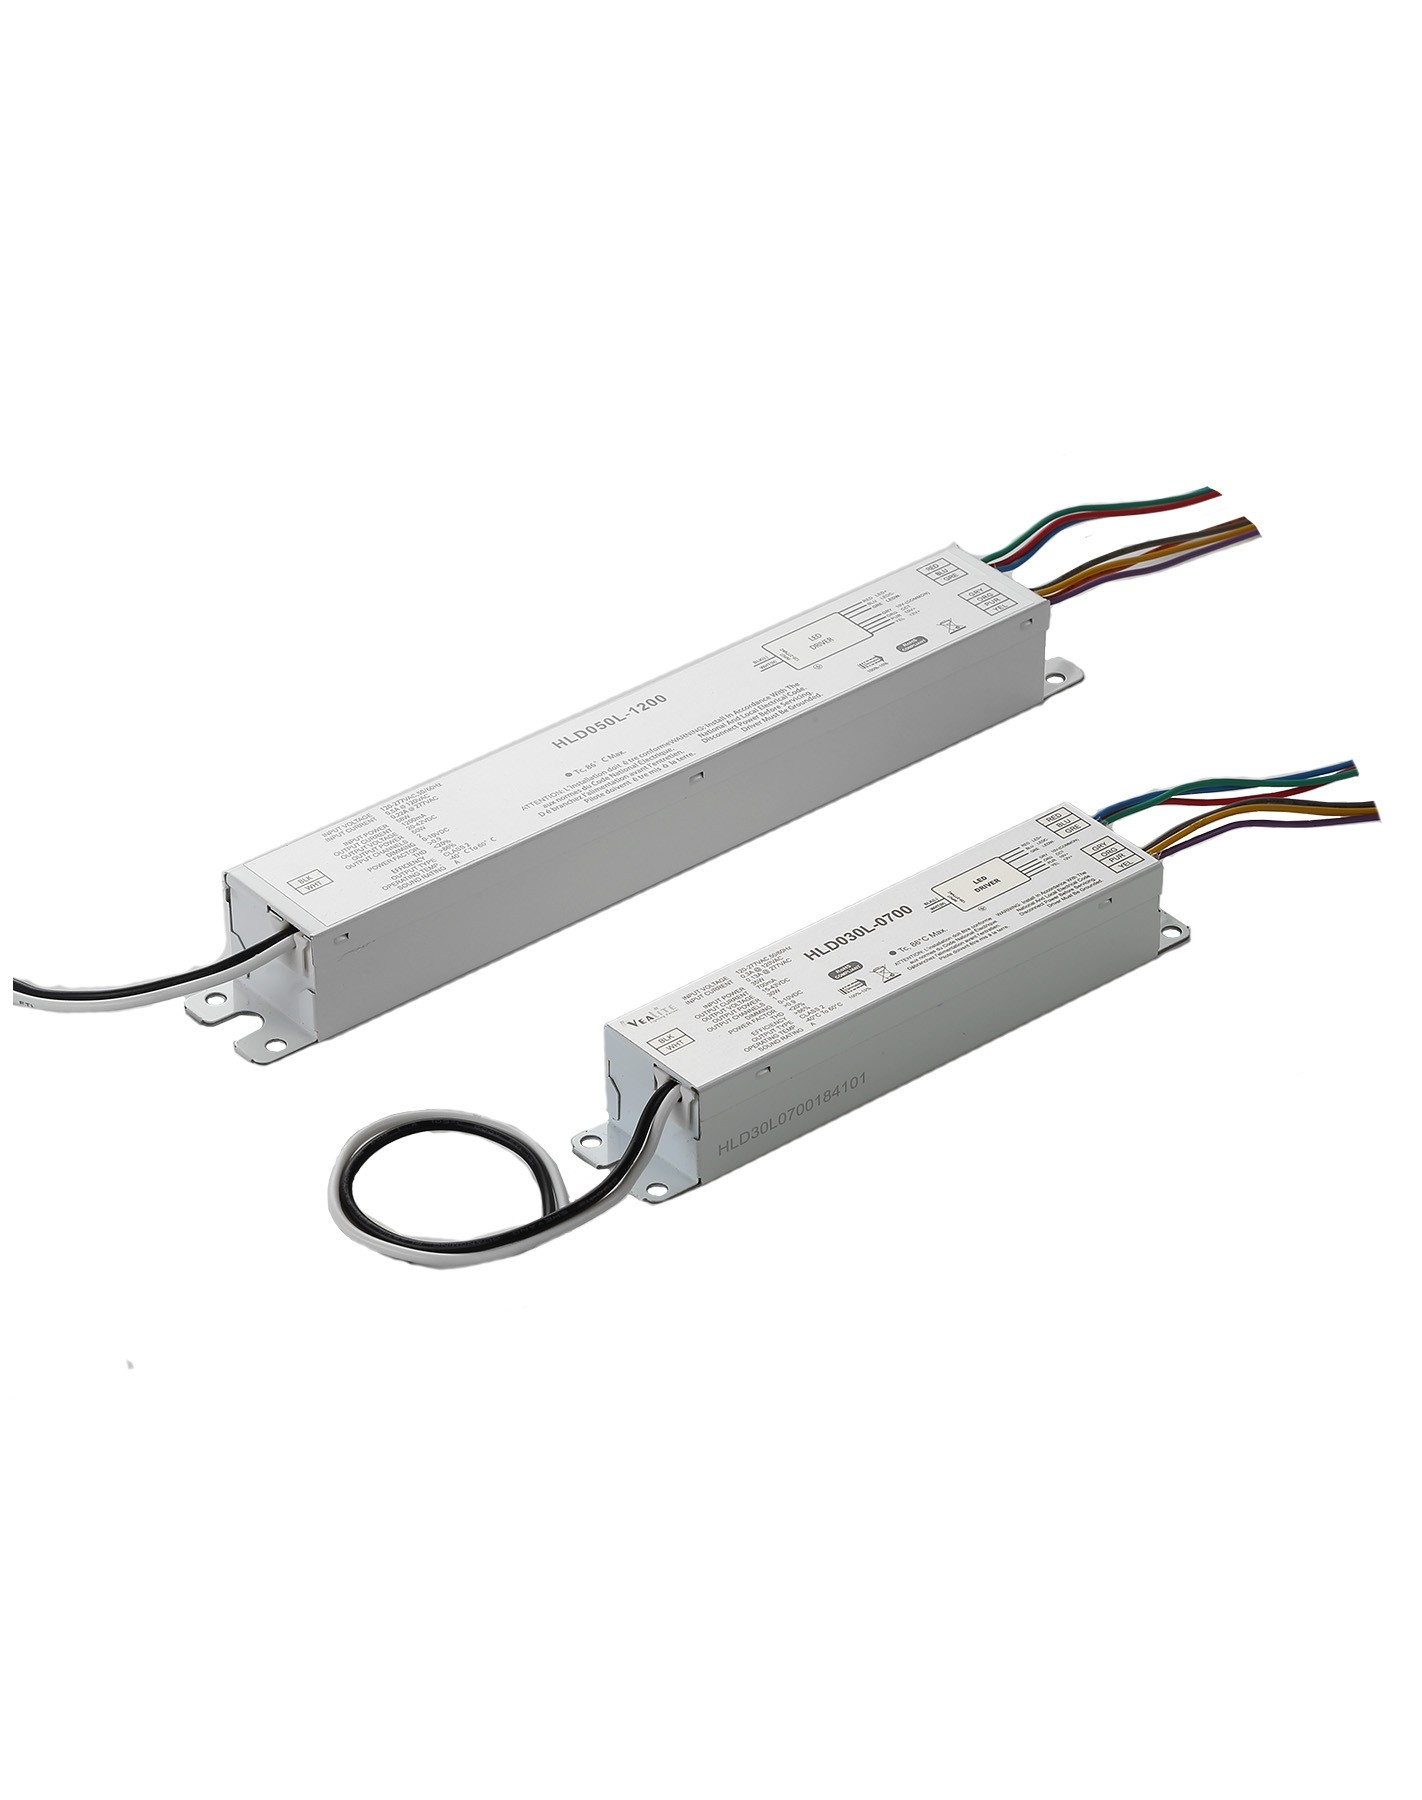 Dual Channel LED Driver